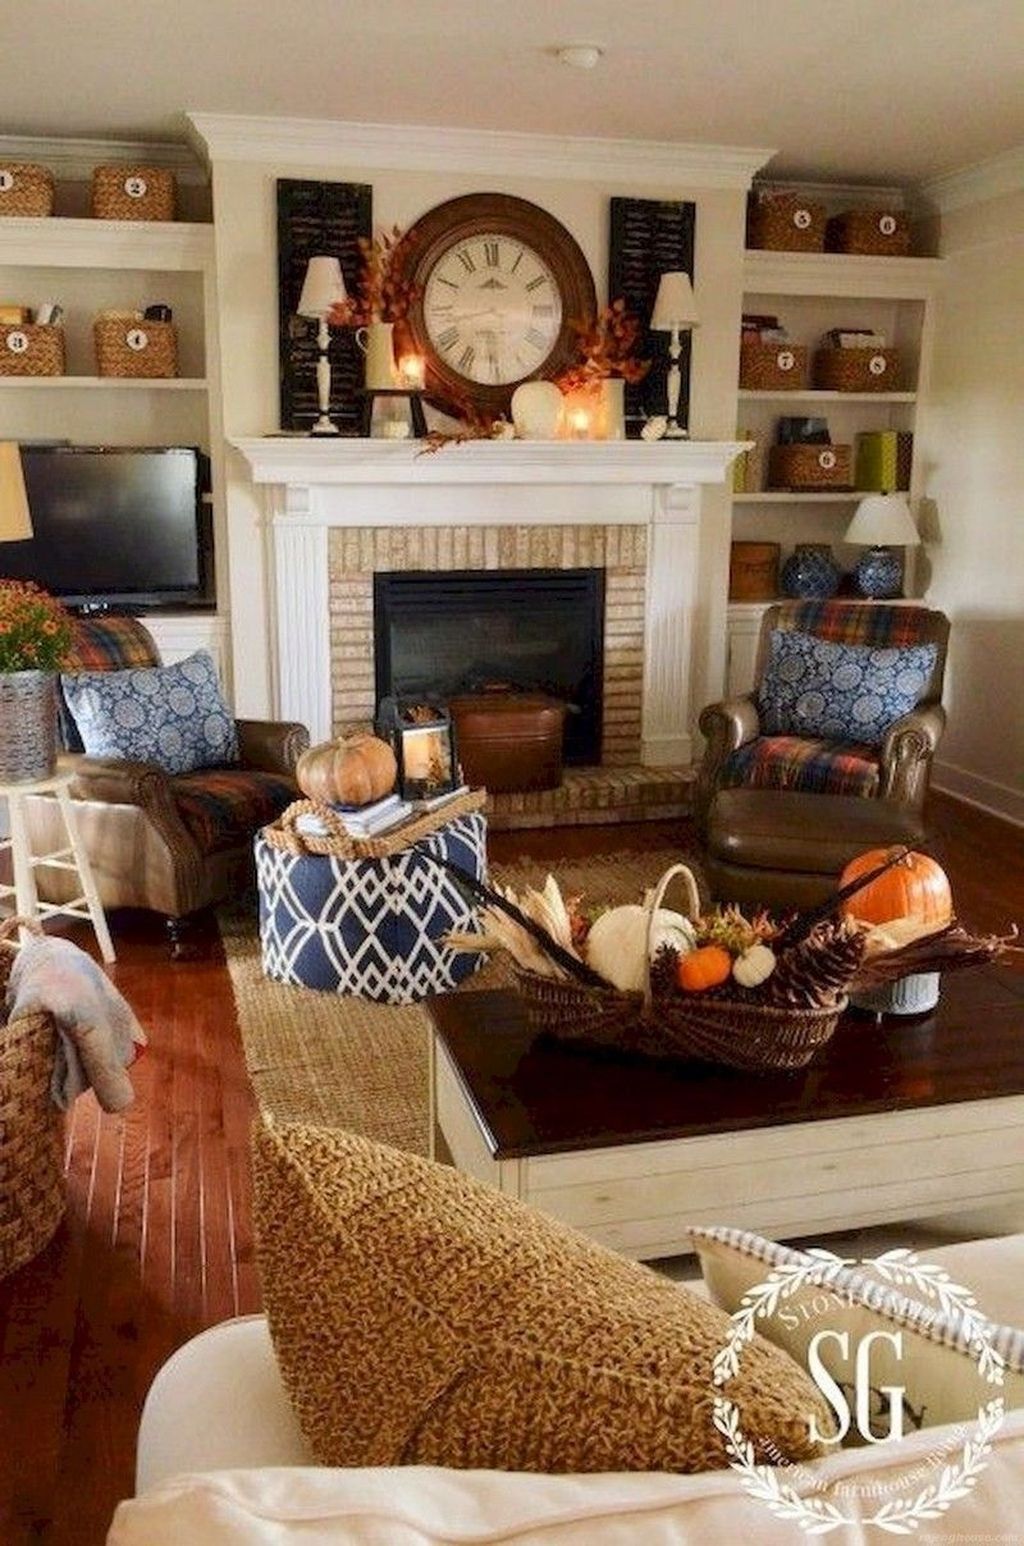 Home Decorating Inspiration: Bring Your Home To Life